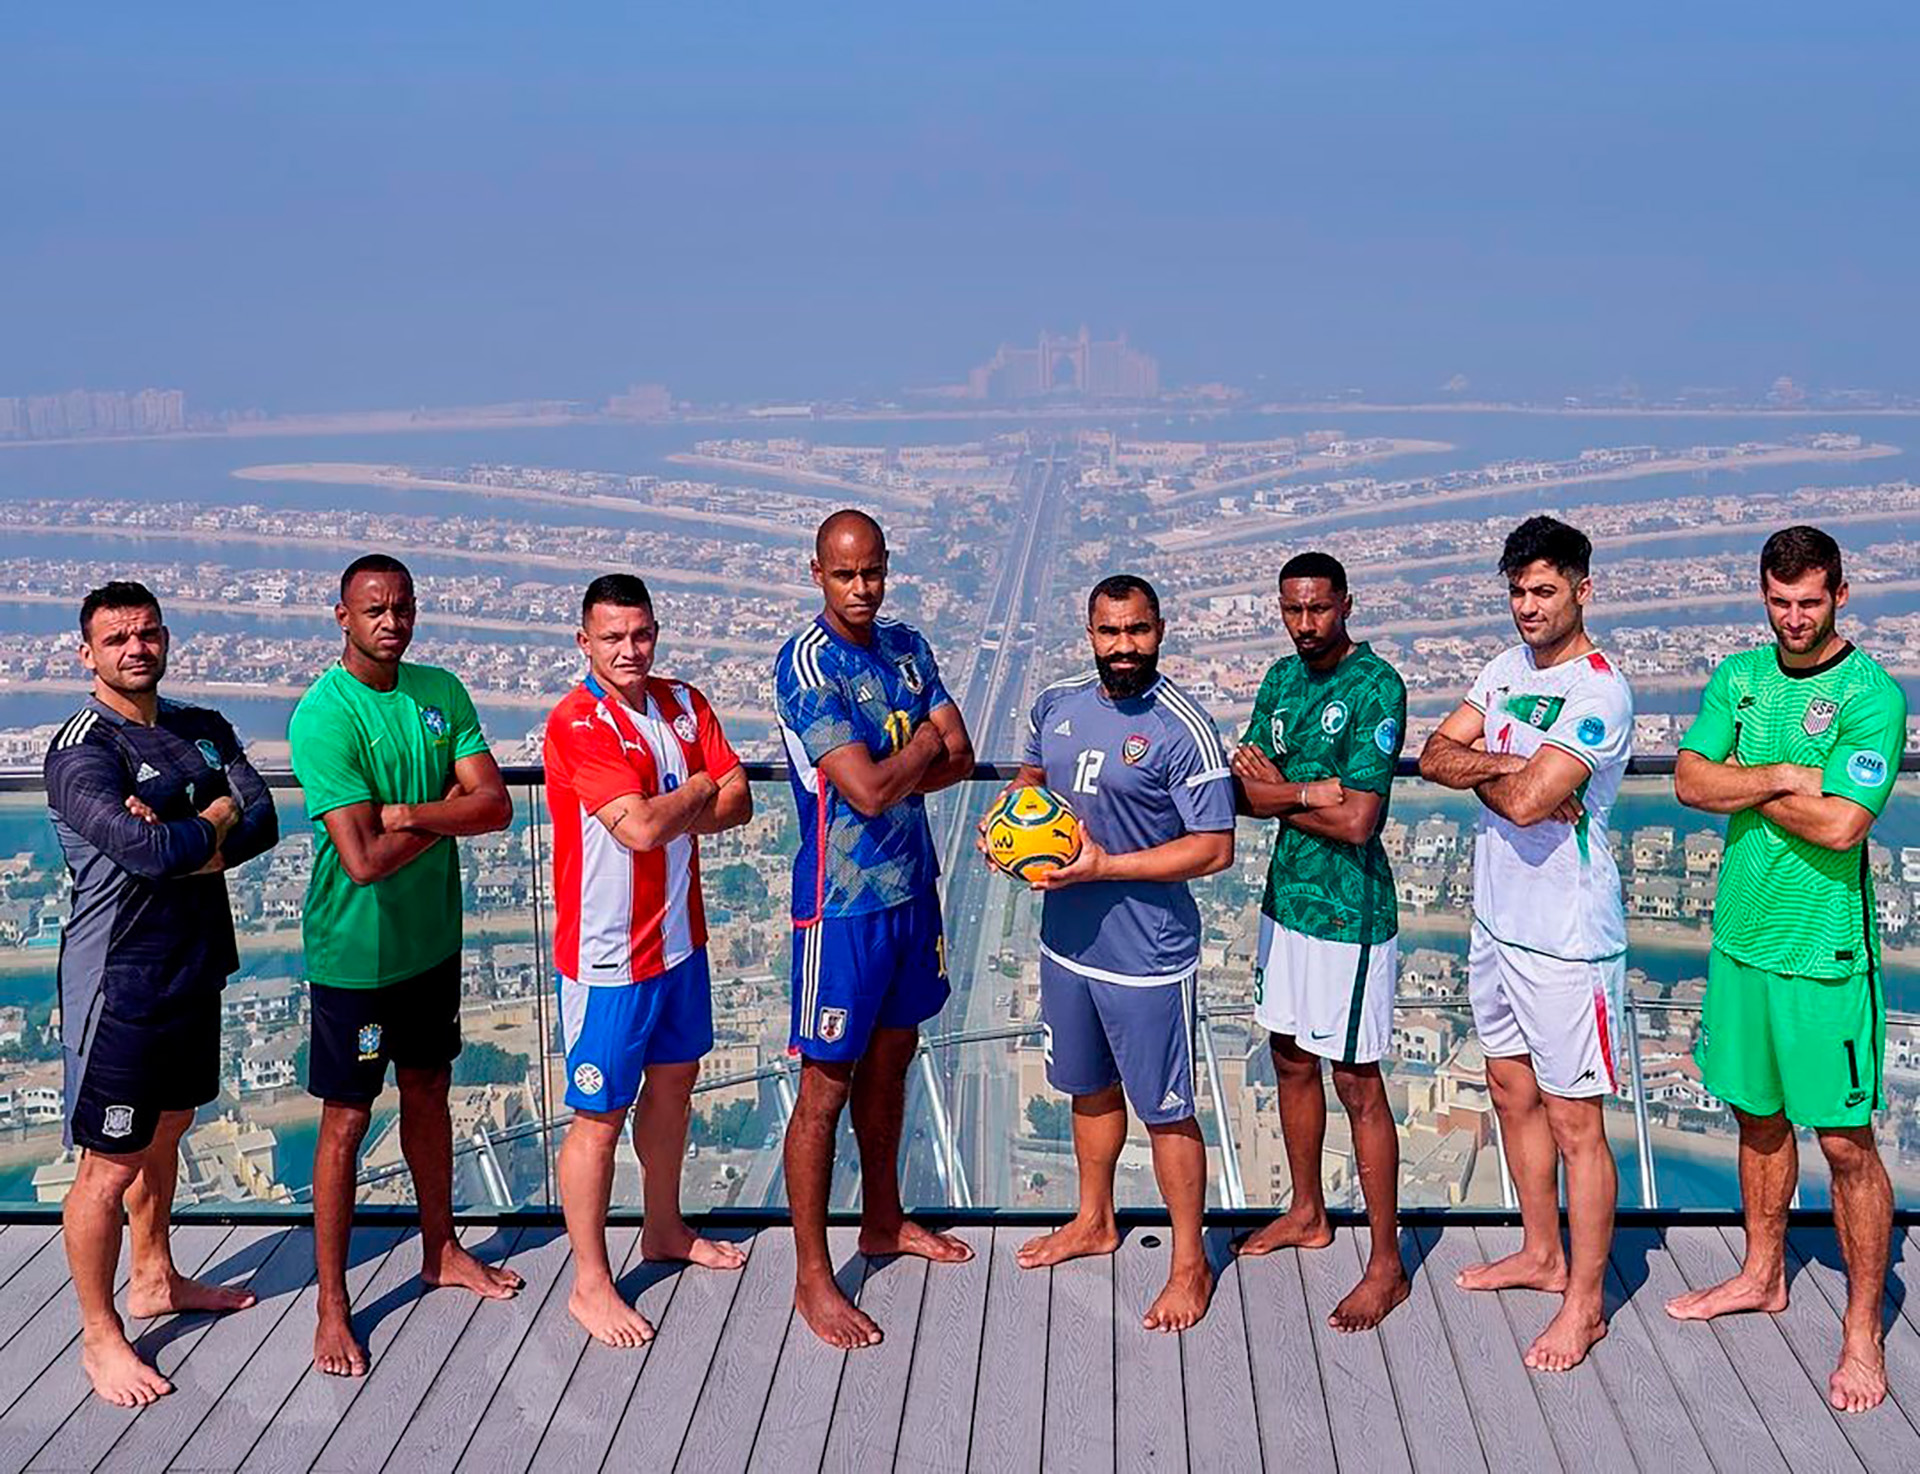 Eight of the best teams in the world met at the Dubai Intercontinental Beach Soccer Cup in November with pure soccer in the Persian Gulf area.